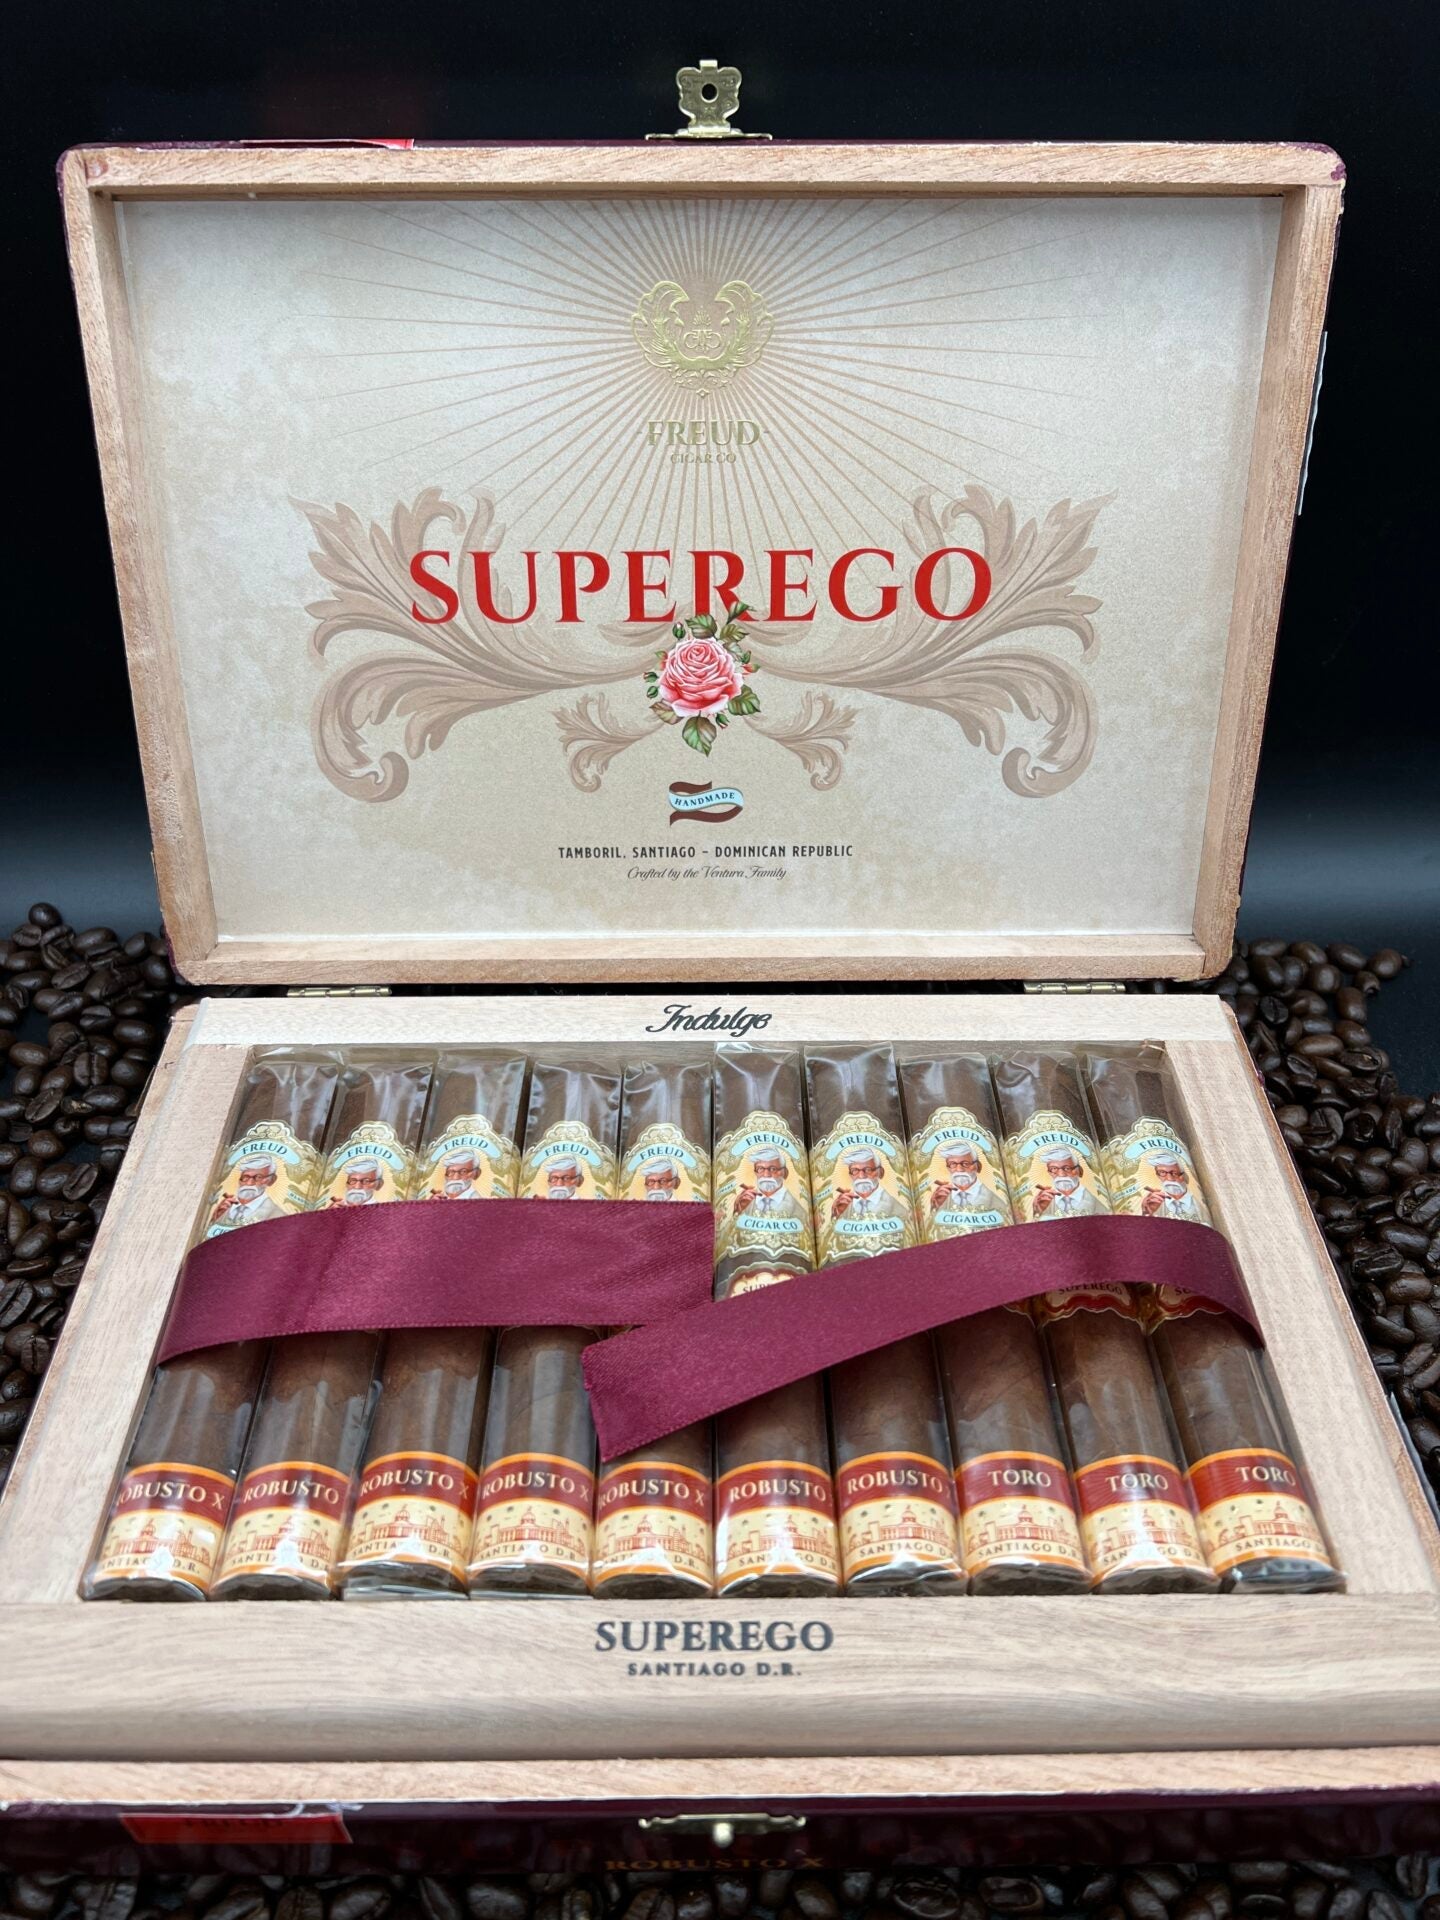 Freud Cigars - SuperEgo RobustoX cigars supplied by Sir Louis Cigars